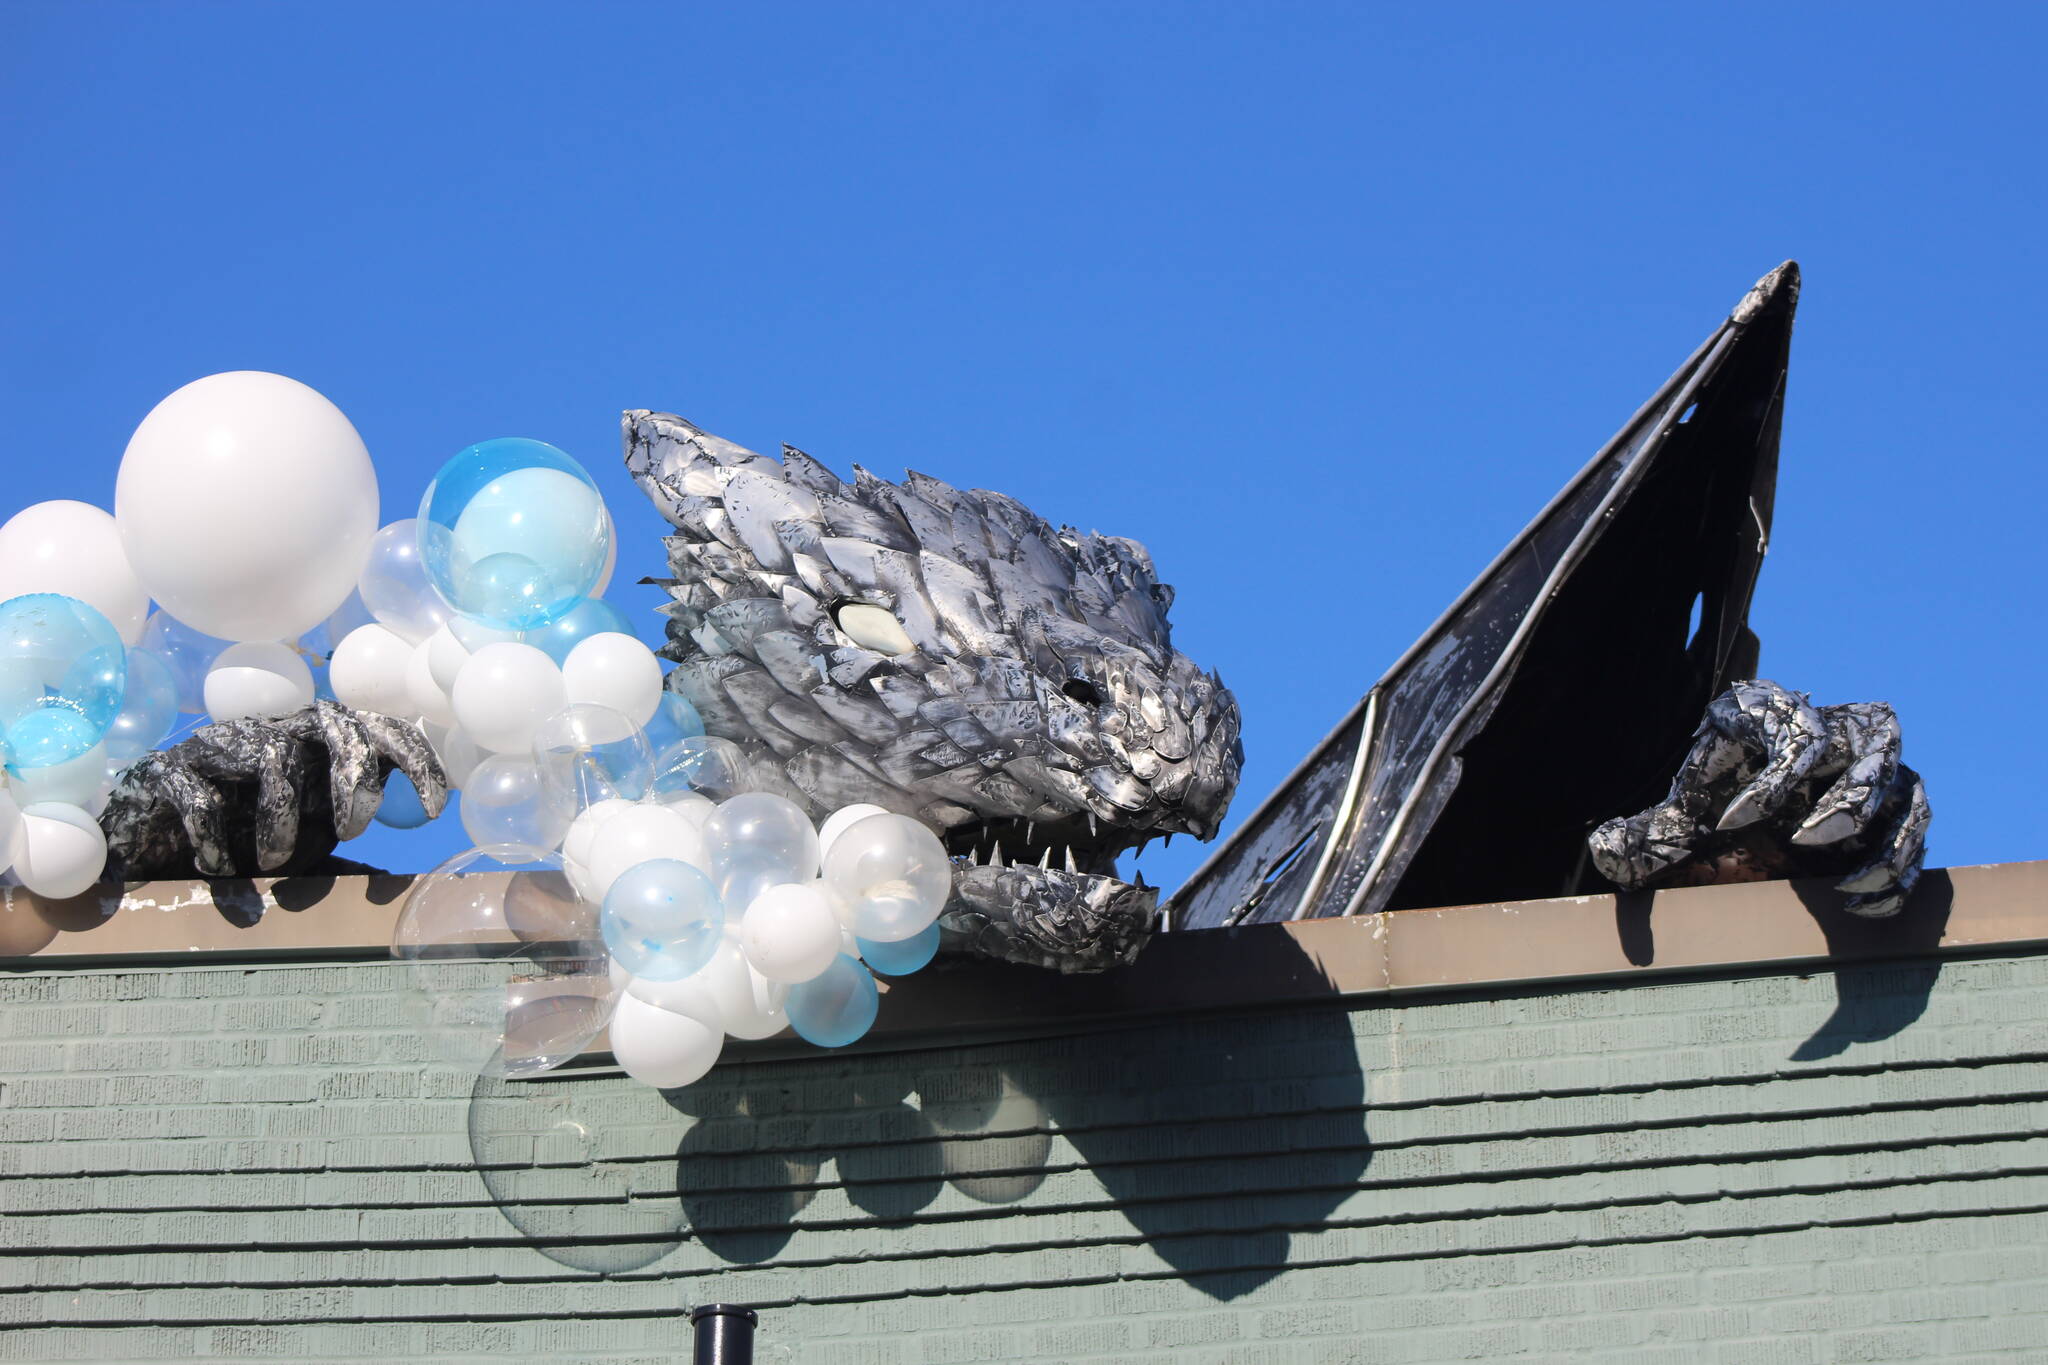 Happy Hatching month to Erasmus the Dragon. Photo by Bailey Jo Josie/Sound Publishing